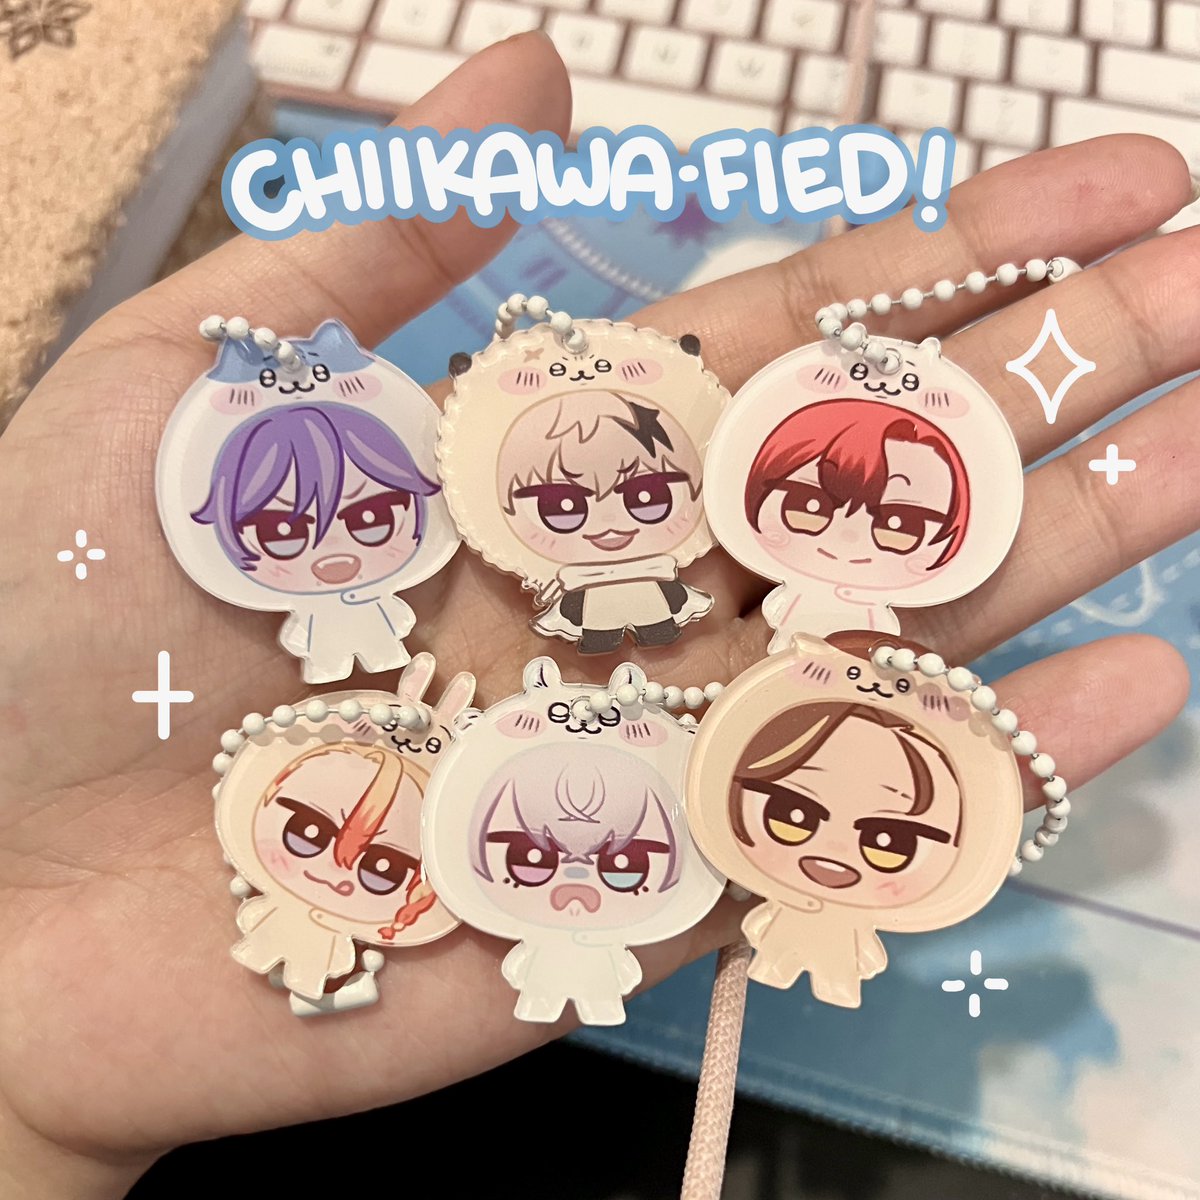 [RT👍🏻] Chiikawa-fied Holo EN boys! They turned out so so cute and I can’t wait to debut them at AISEA this weekend! 

I’ll be at Table AL3! 😊💙

#gbart #bettelful #flayonscrayons #artxel #crimzonmuze #pihakkasso